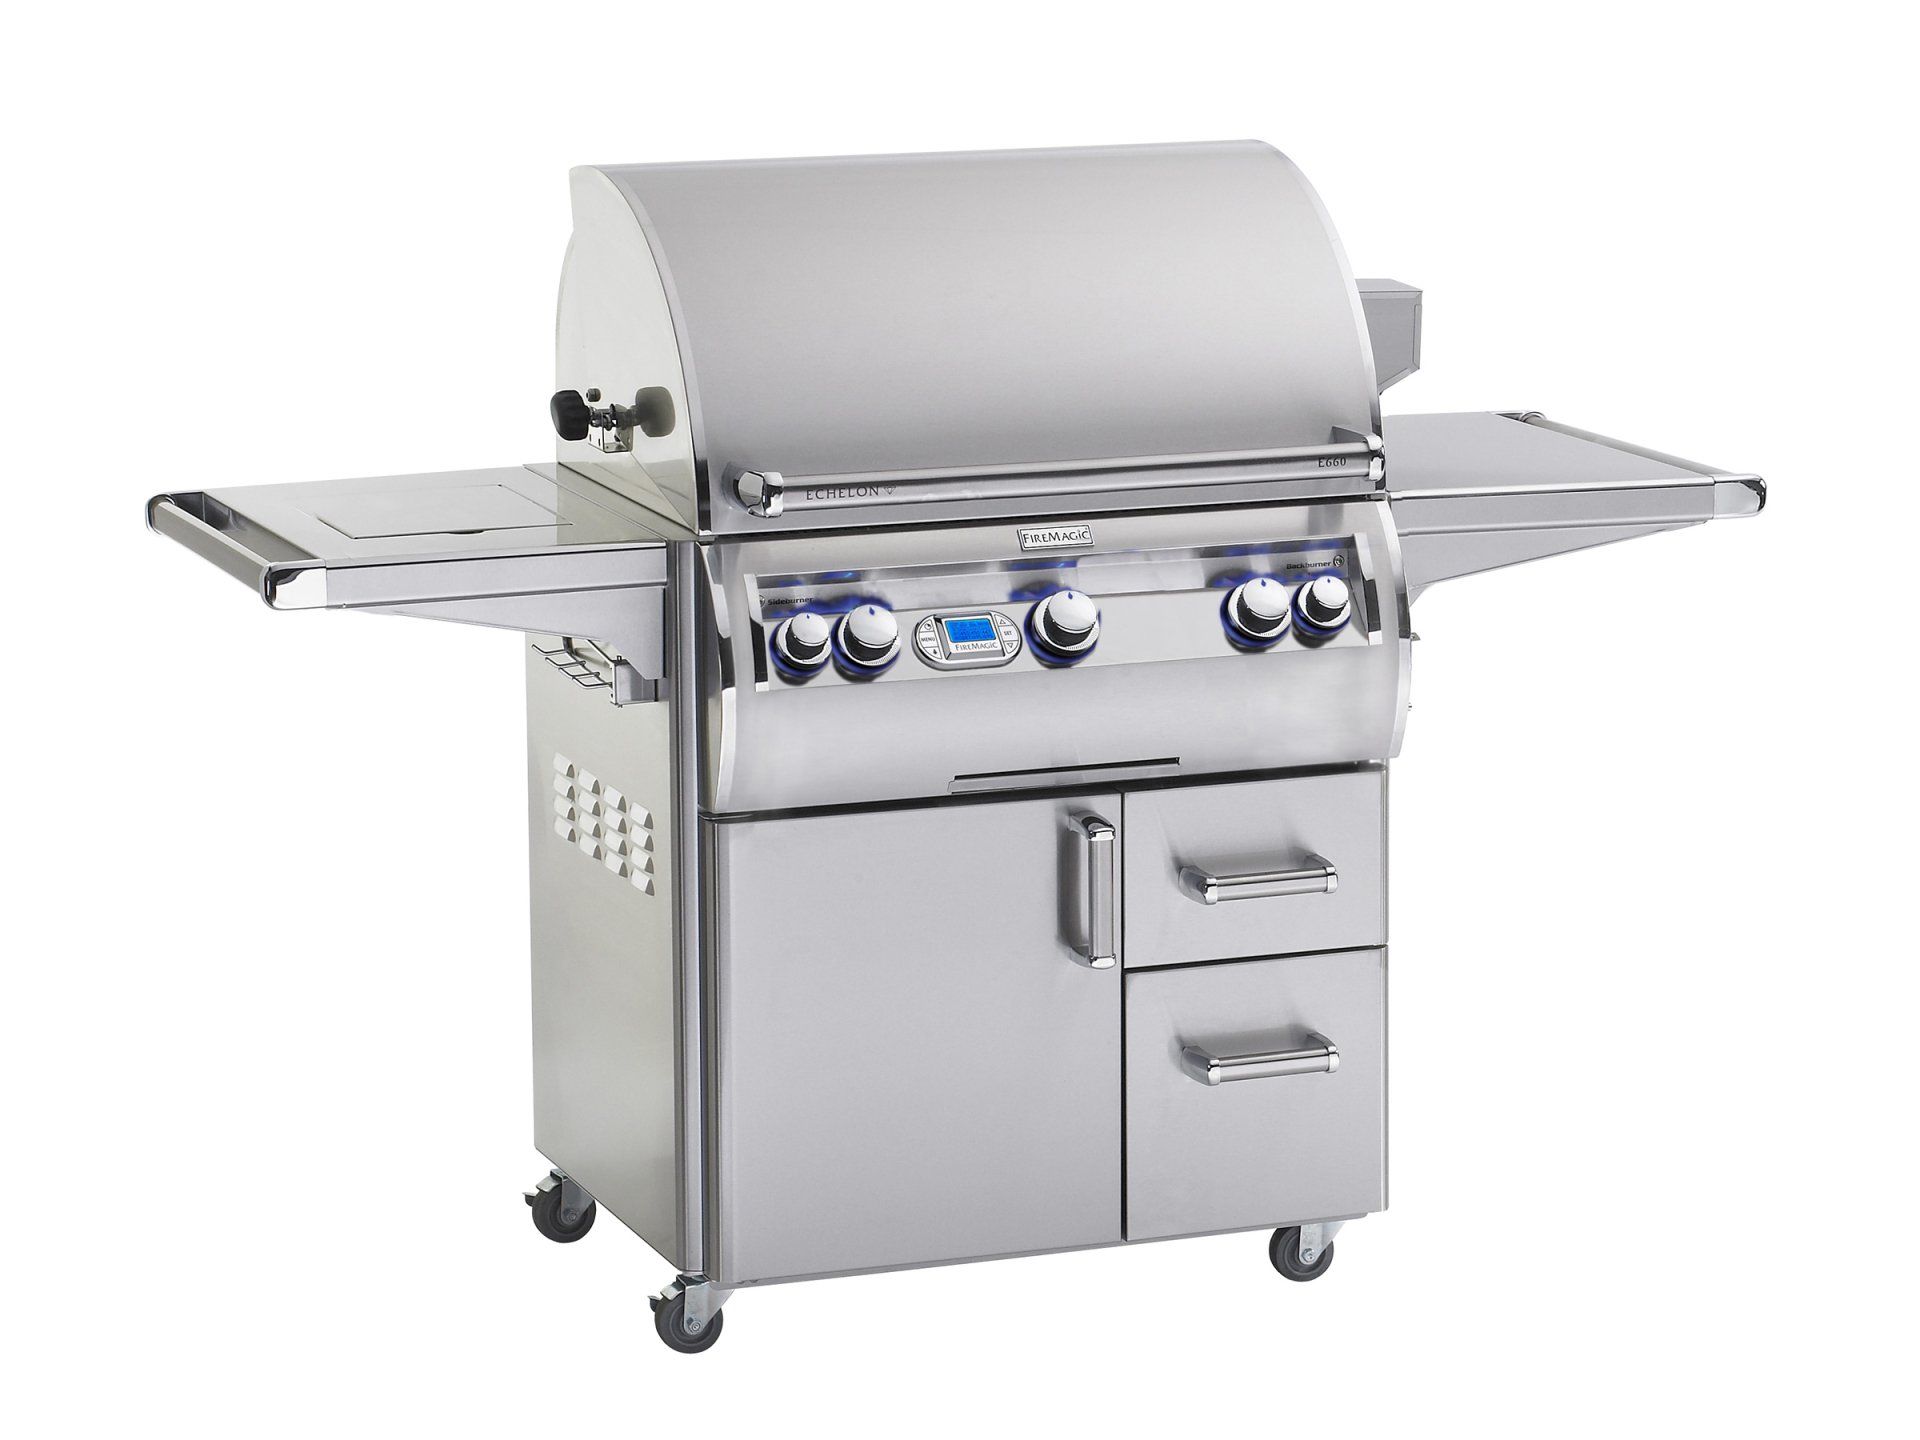 FireMagic outdoor grill